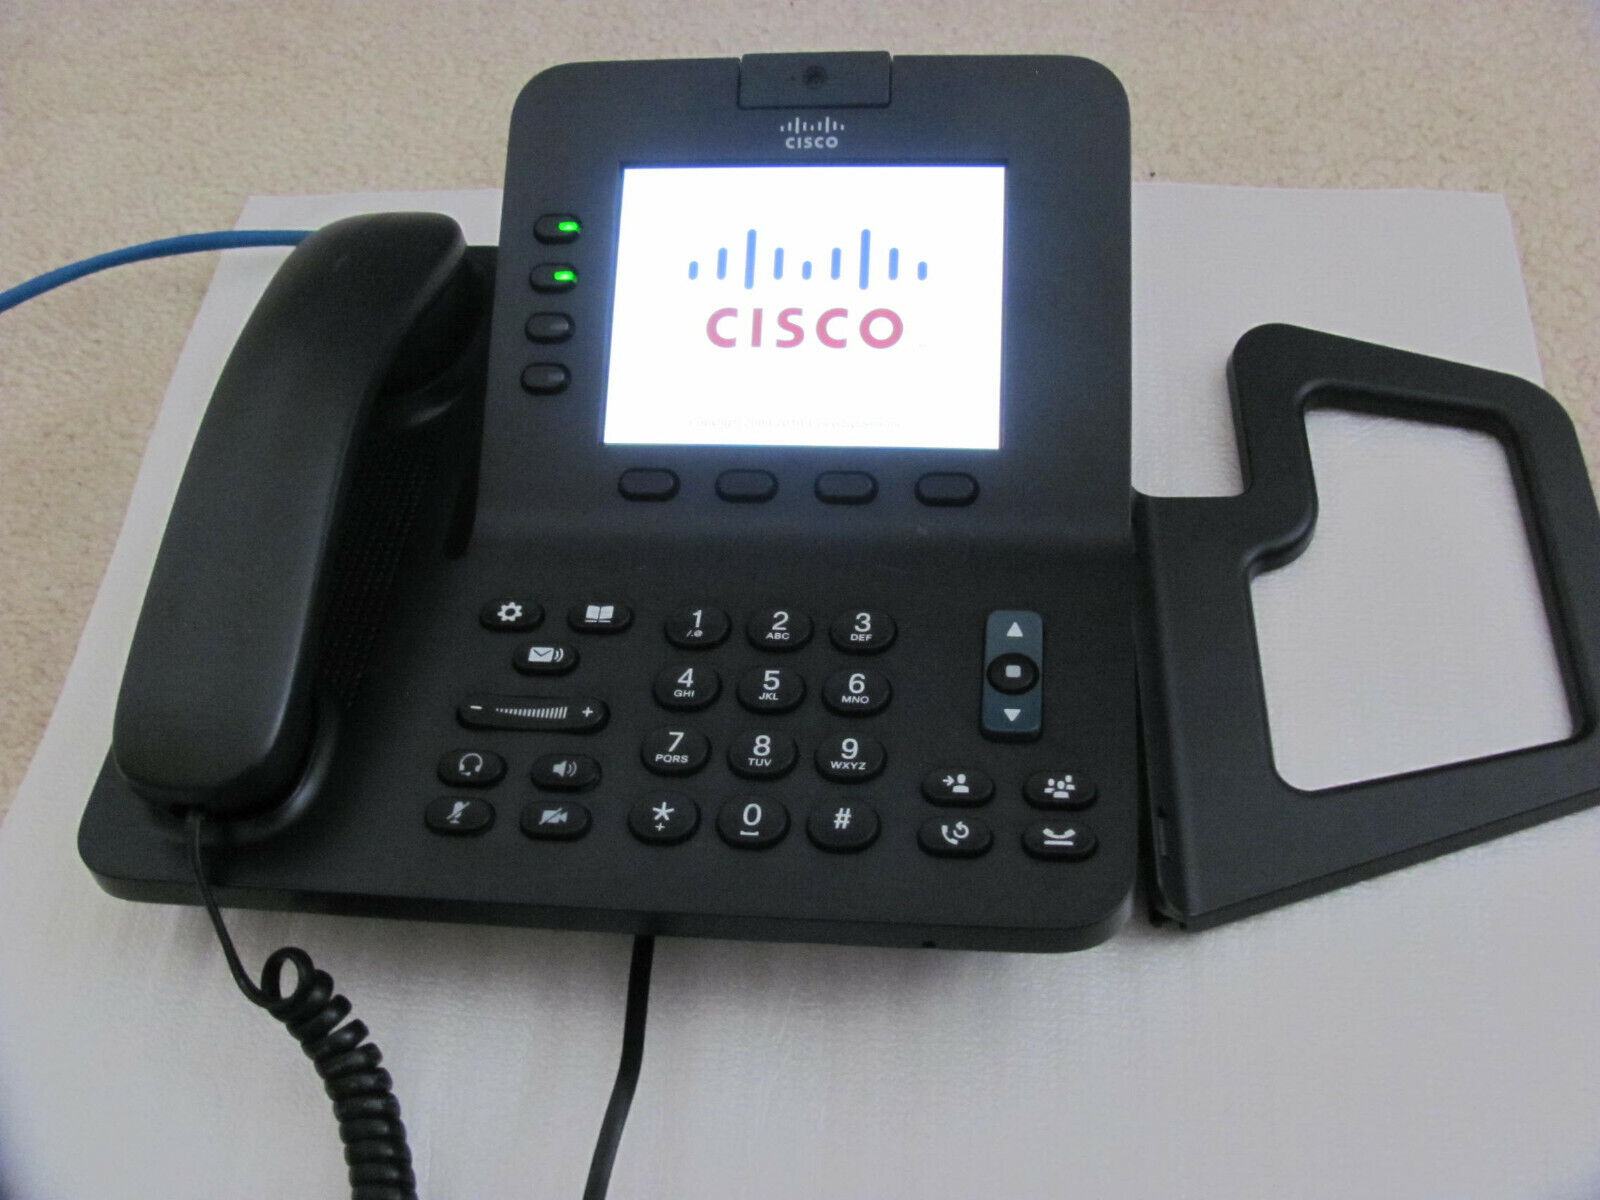 Lot of 2 Cisco CP-8945 Video Cam Conference Voip Phone Color Screen CP-8945-K9